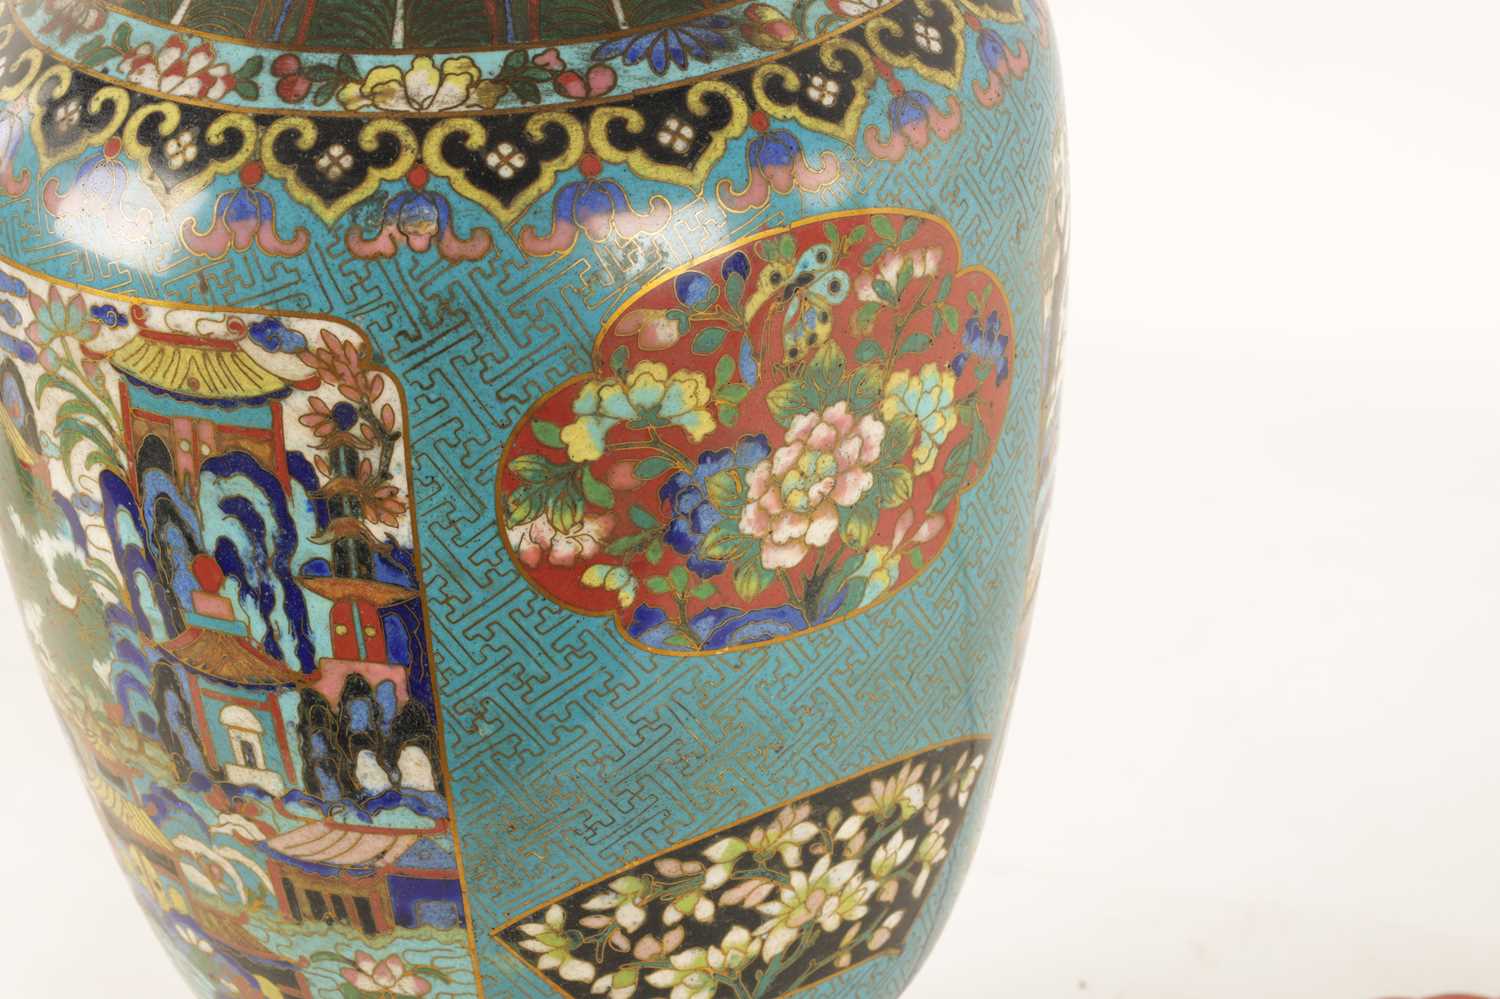 A LATE 19TH/EARLY 20TH CENTURY CENTURY CHINESE CLOISONNE VASE LAMP - Image 7 of 34